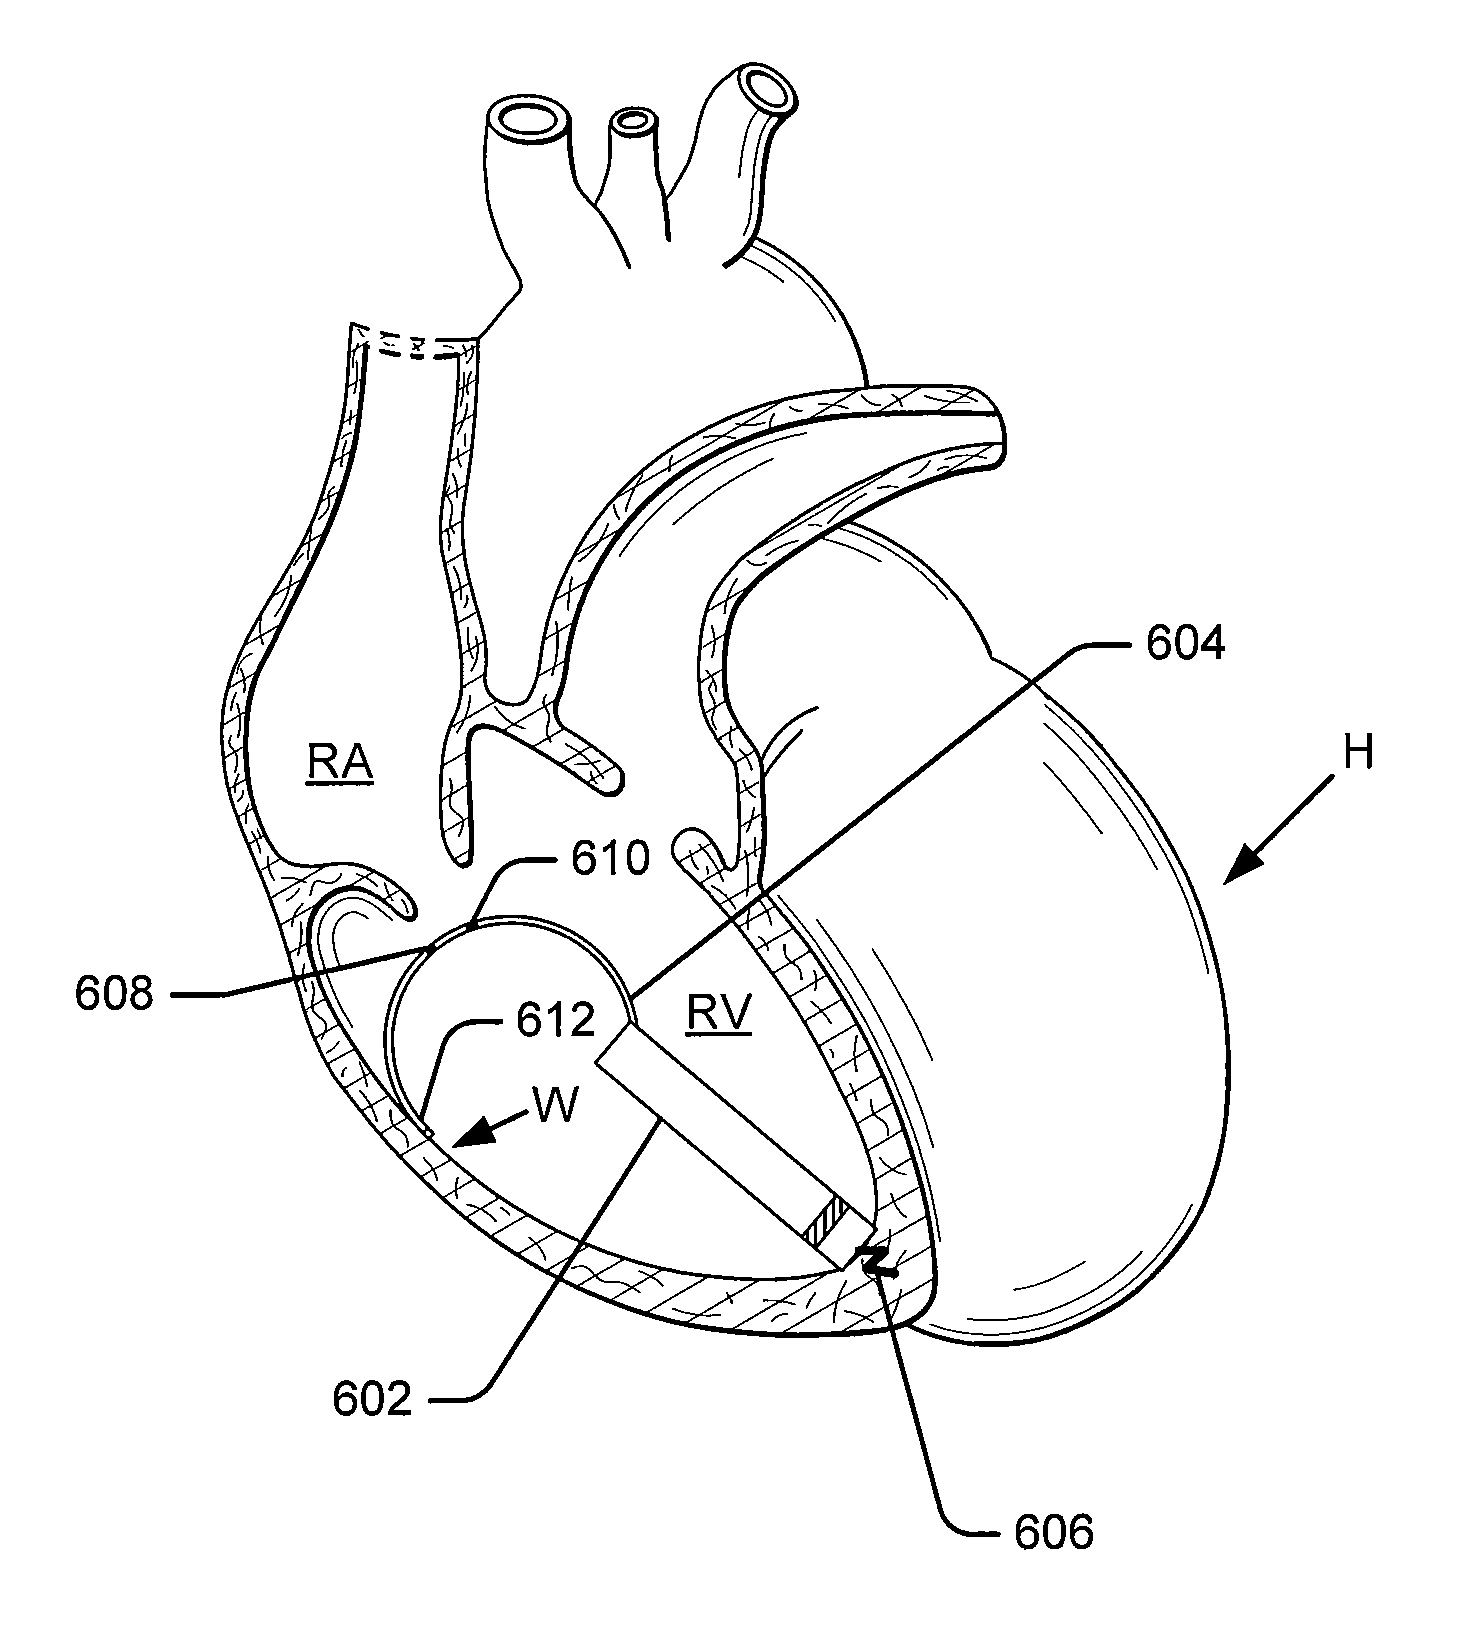 Leadless intra-cardiac medical device with dual chamber sensing through electrical and/or mechanical sensing